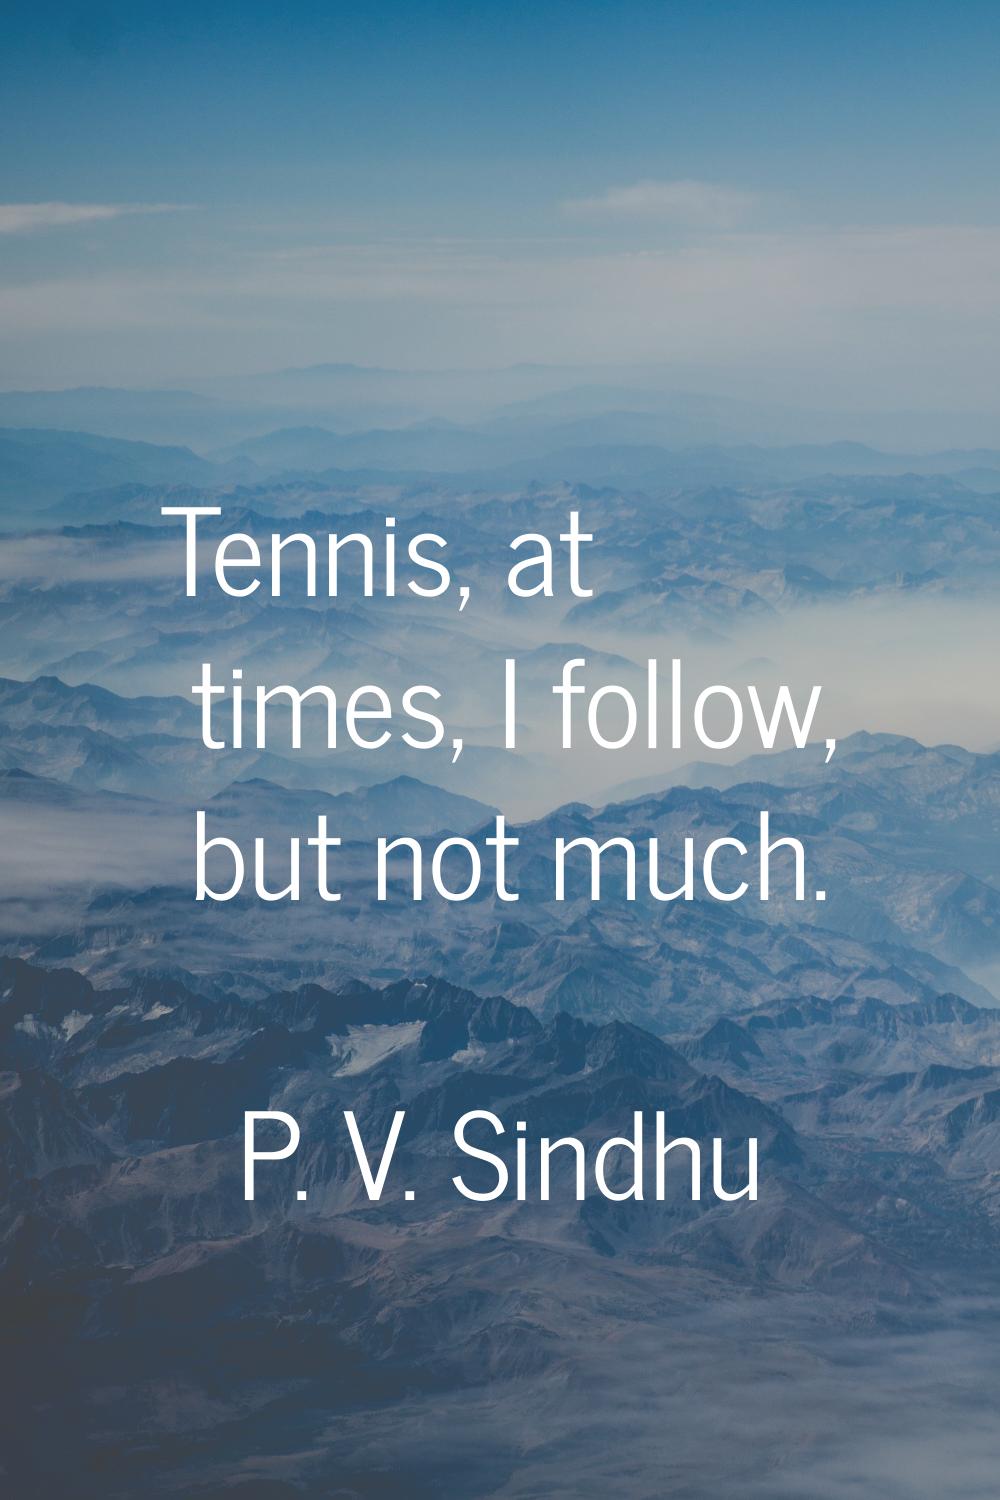 Tennis, at times, I follow, but not much.